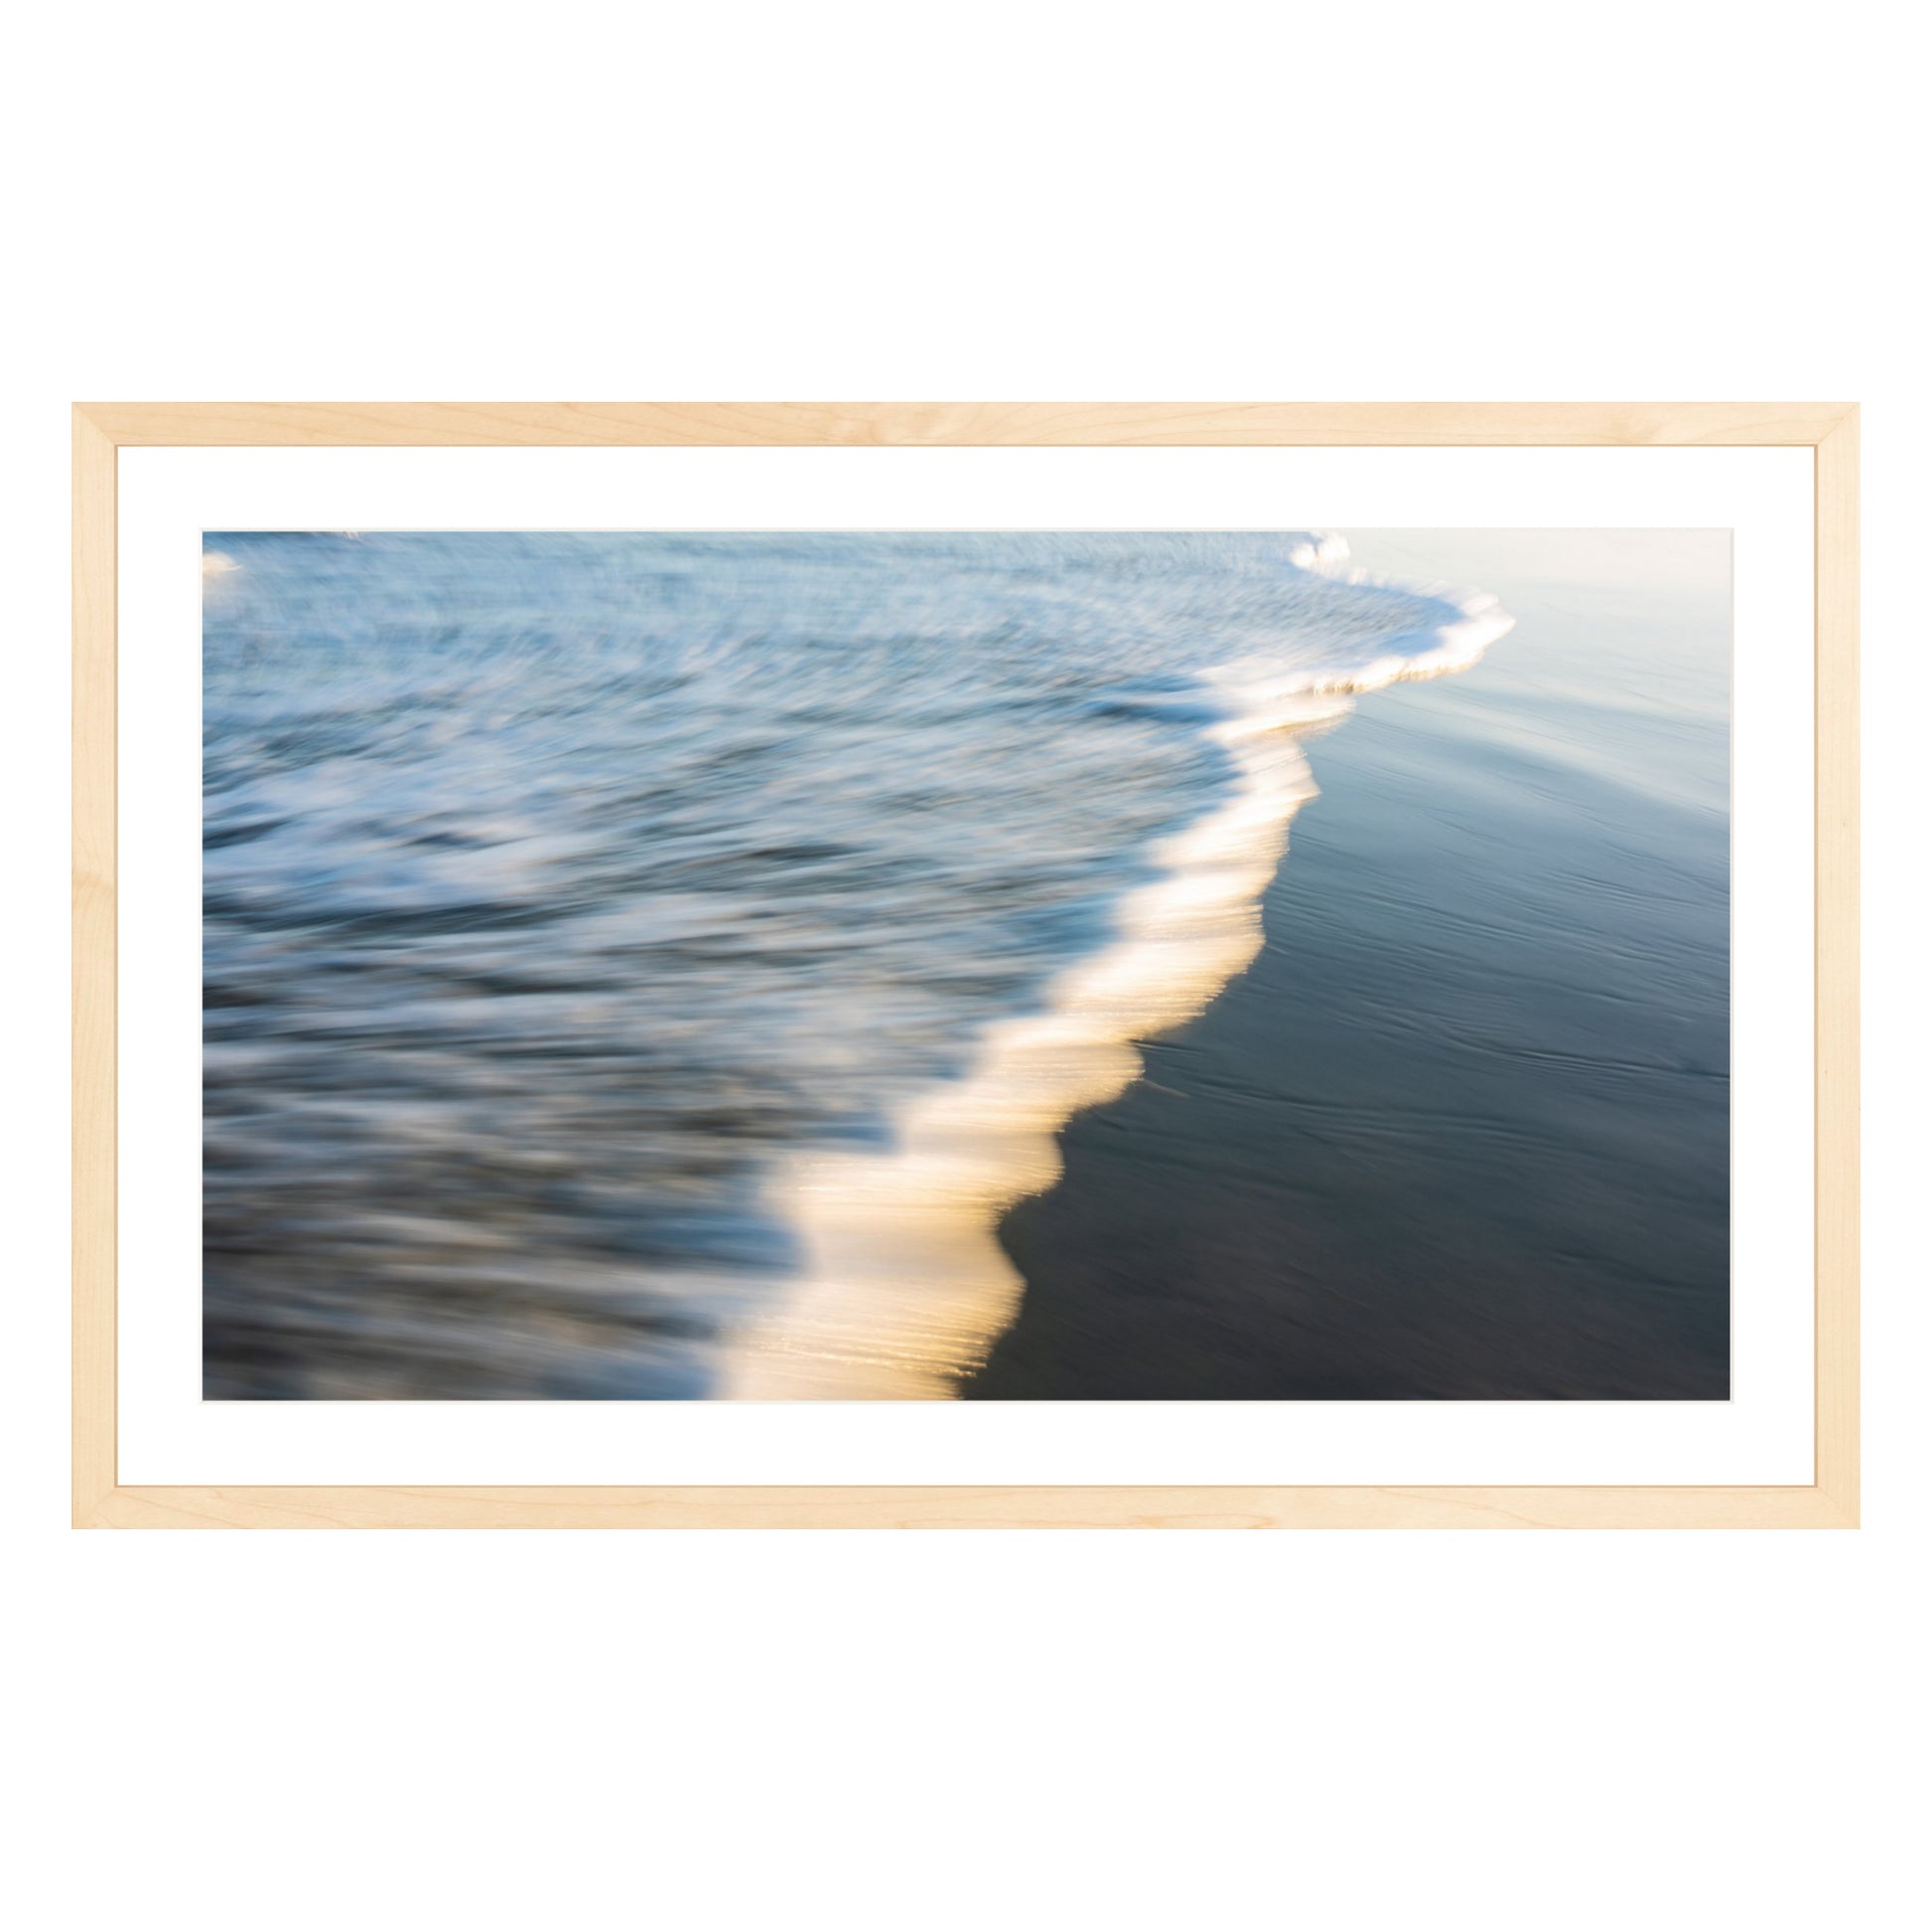 Photograph of wave at Atlantic Ocean framed in natural wood with white mat